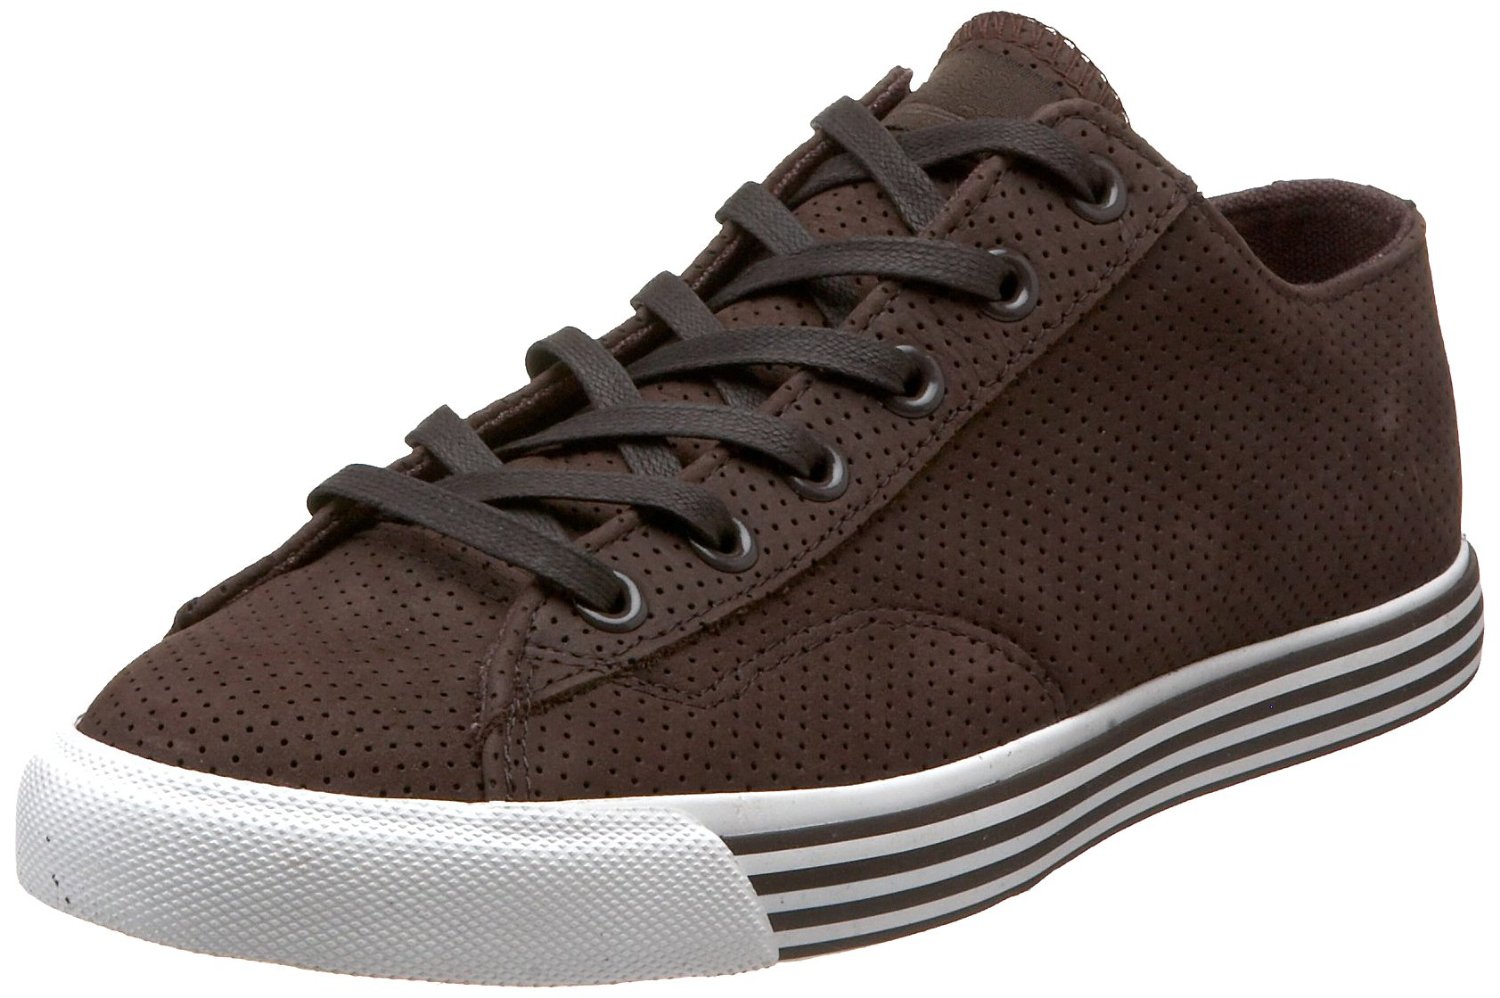 Pro Keds Pro Keds Mens 69er Lo Perforated Sneaker In Brown For Men Lyst 0928